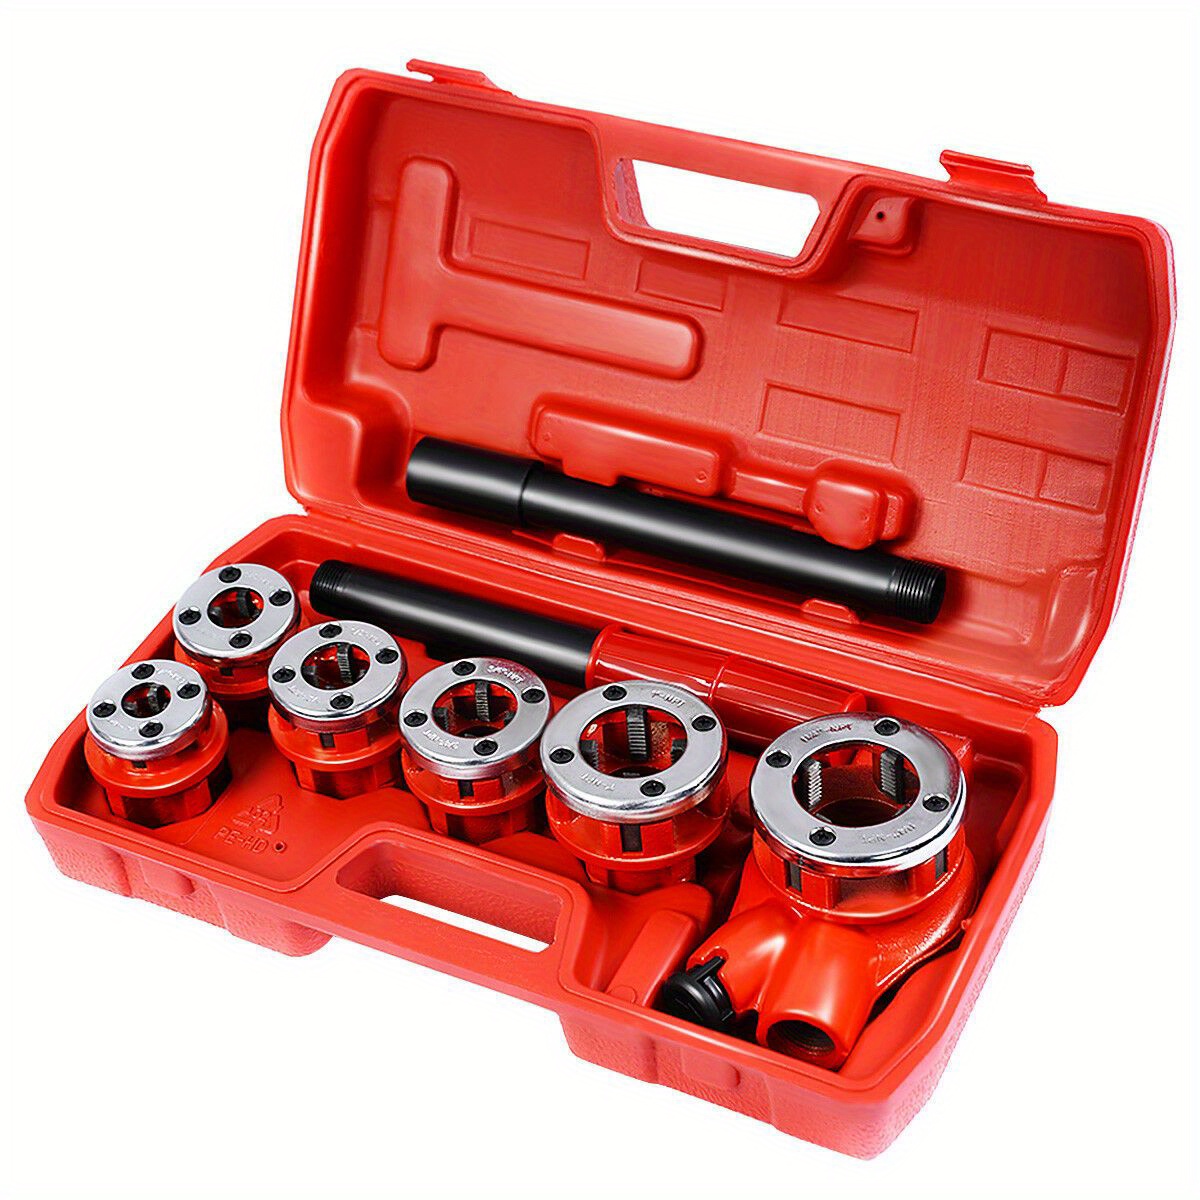 

Lifezeal New Ratchet Ratcheting Pipe Threader Kit Set W/ 6 Dies And Storage Case